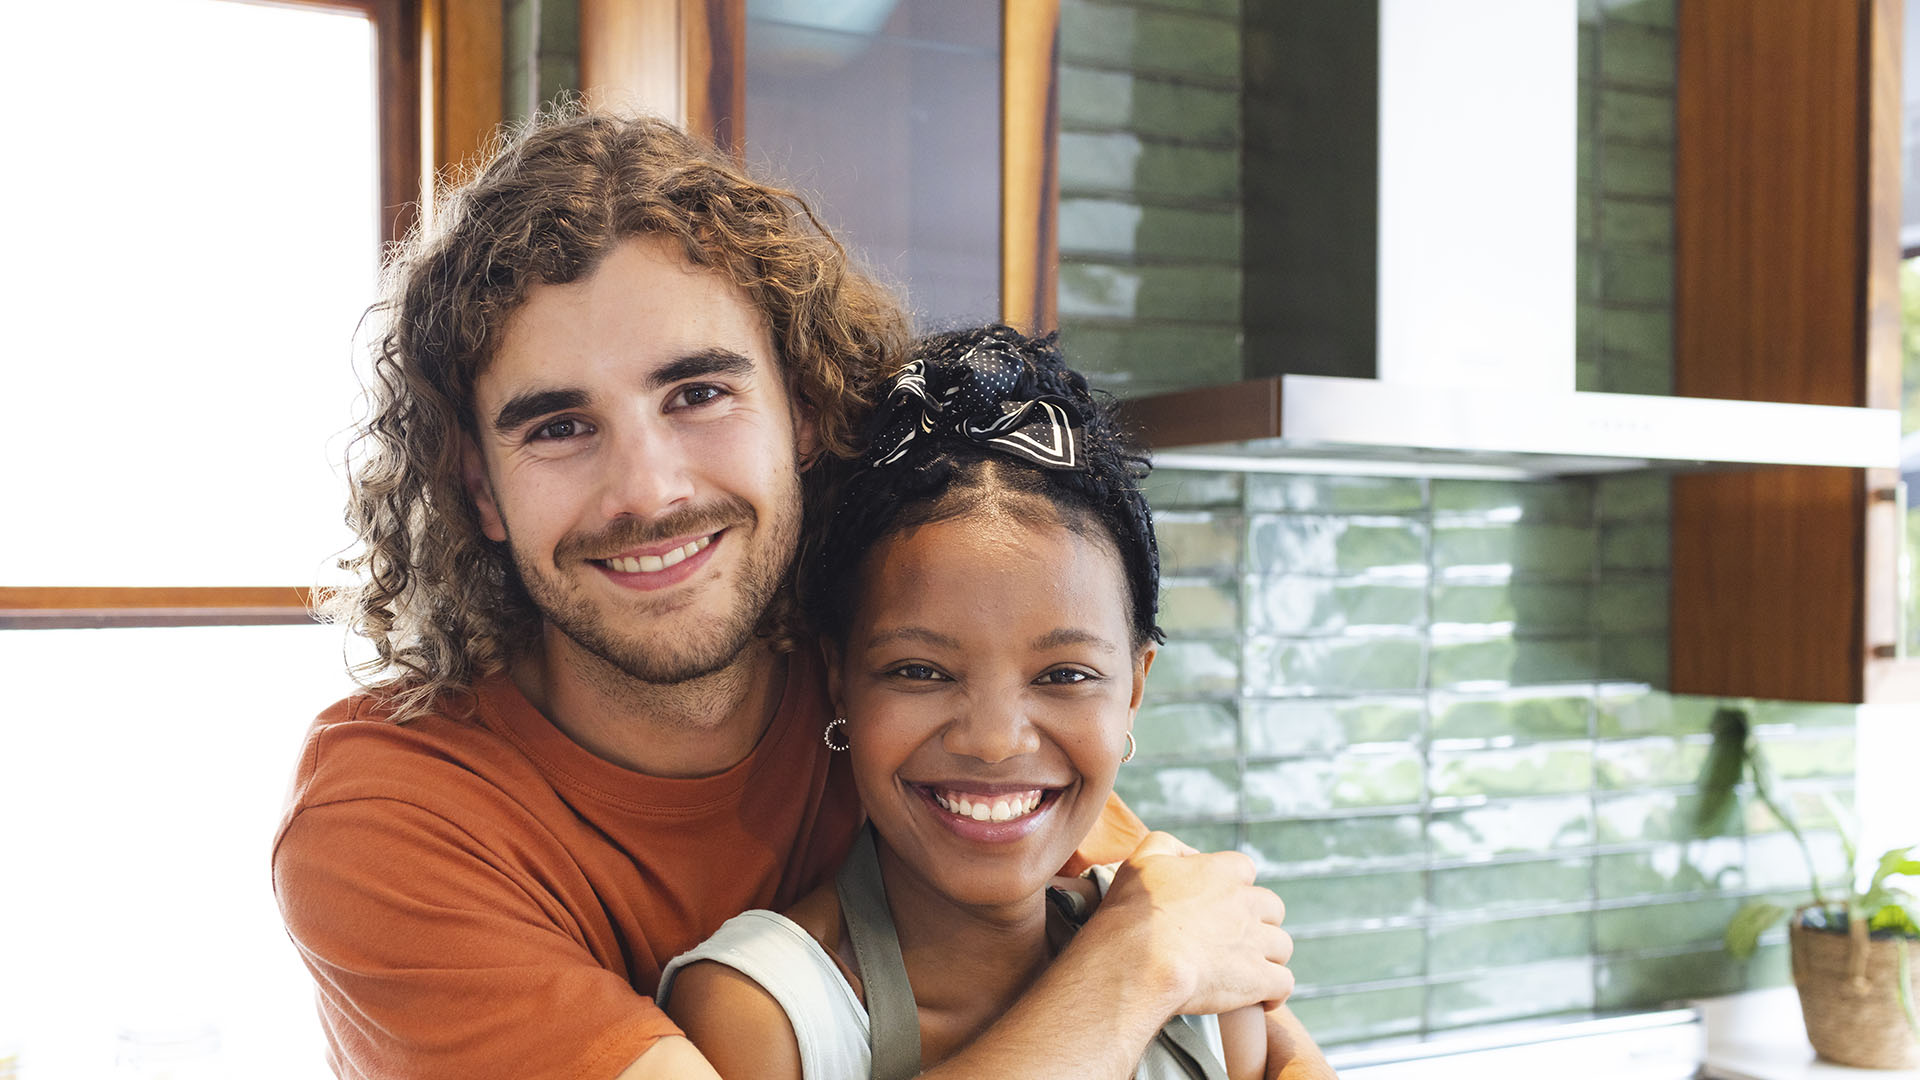 A man with curly hair and a woman with braids smile while hugging in a modern kitchen with green tiled walls, pondering if renting is ruining your future.